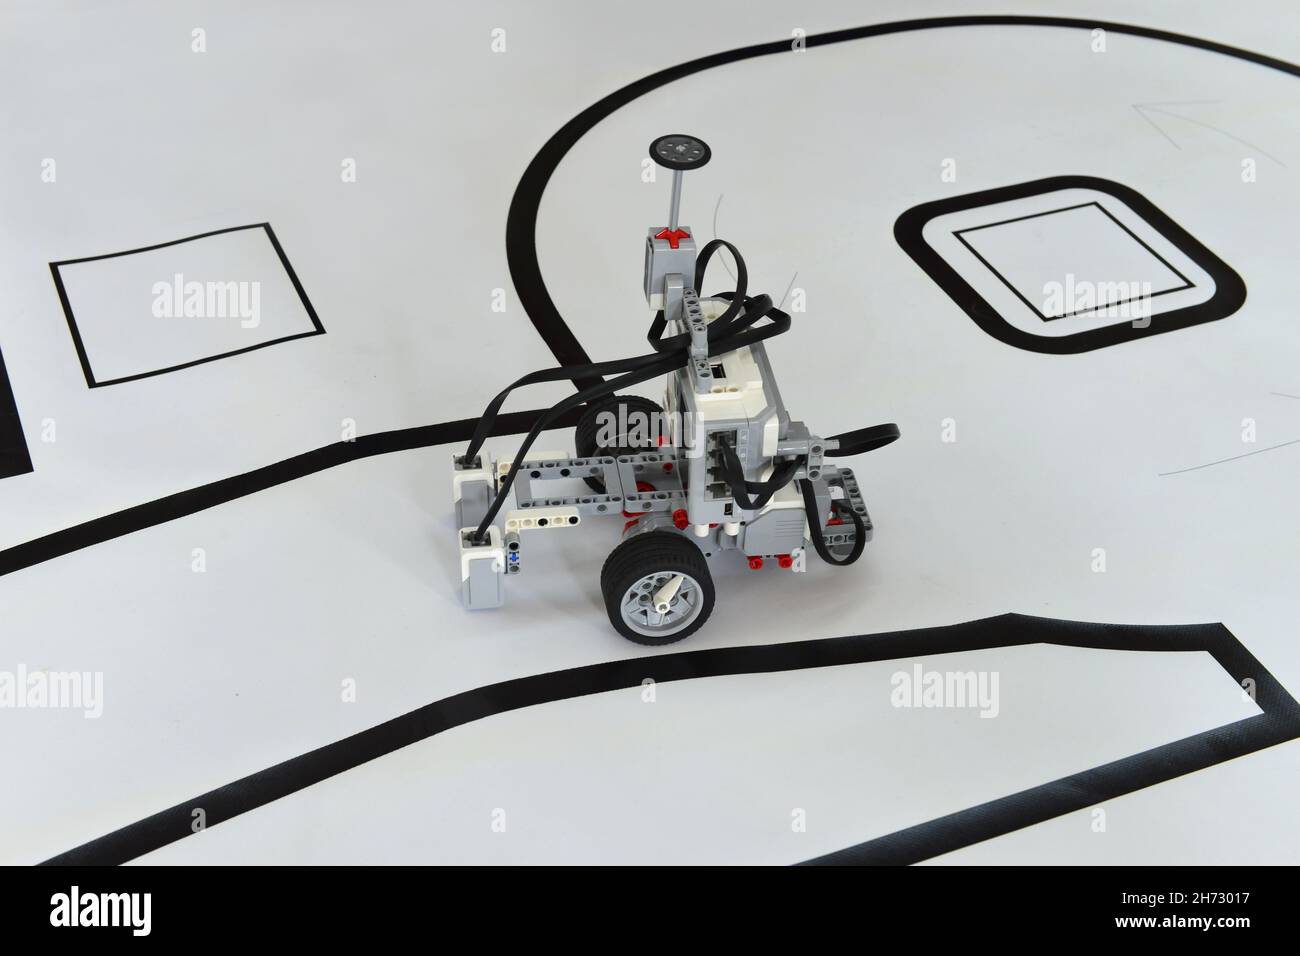 Programmable robot with wheels driving on paper road. robotic car with obstacle line follow ability Stock Photo